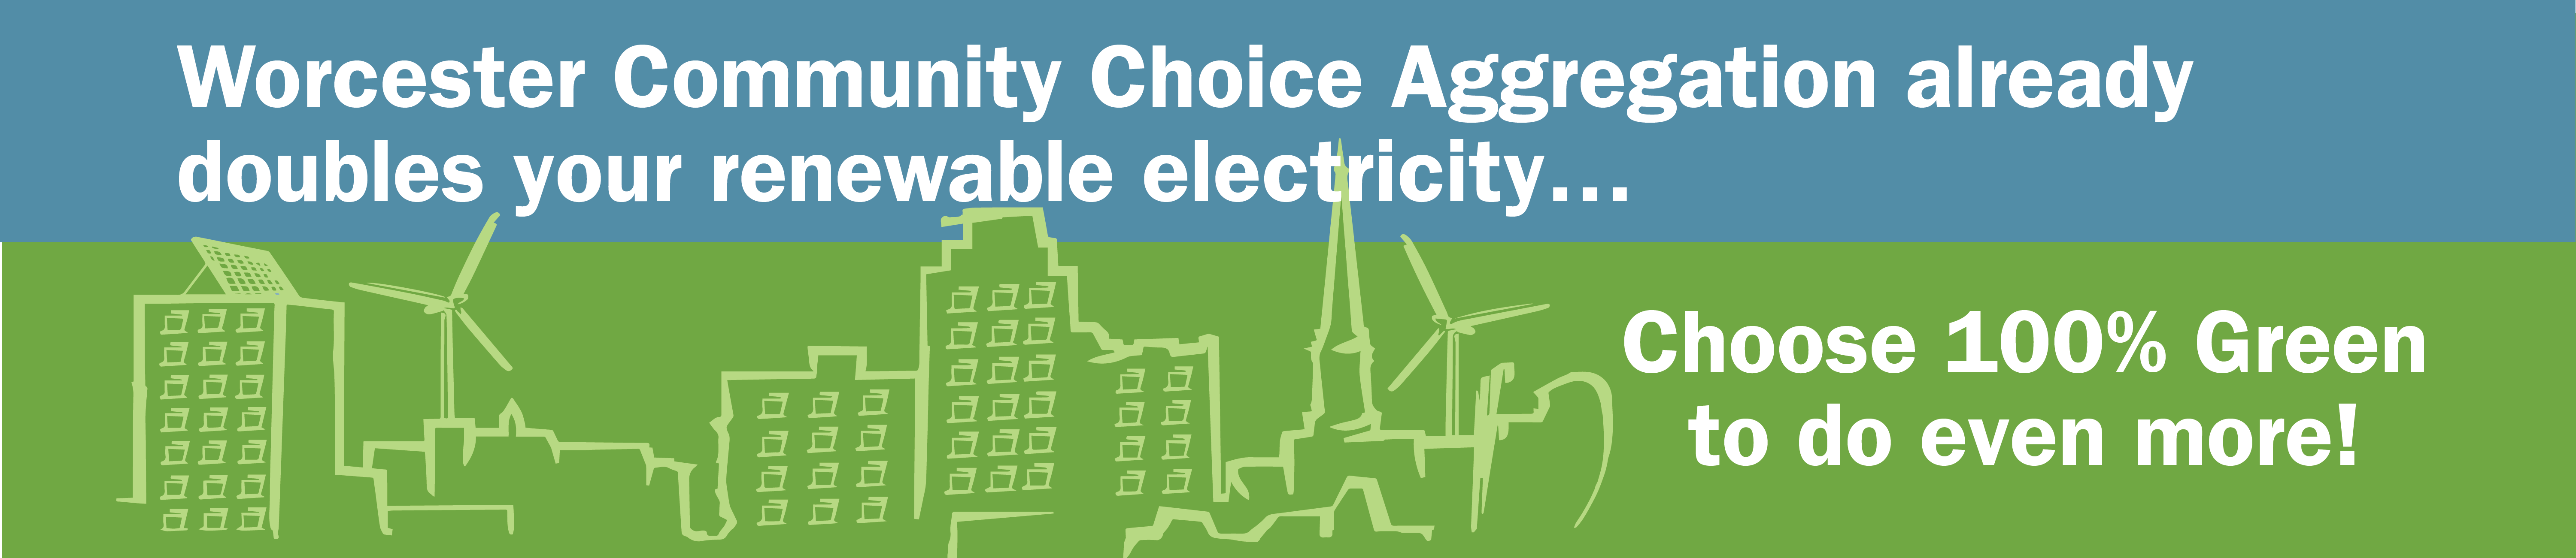 Worcester Community Choice Aggregation already doubles your renewable electricity... Choose 100% Green to do even more!